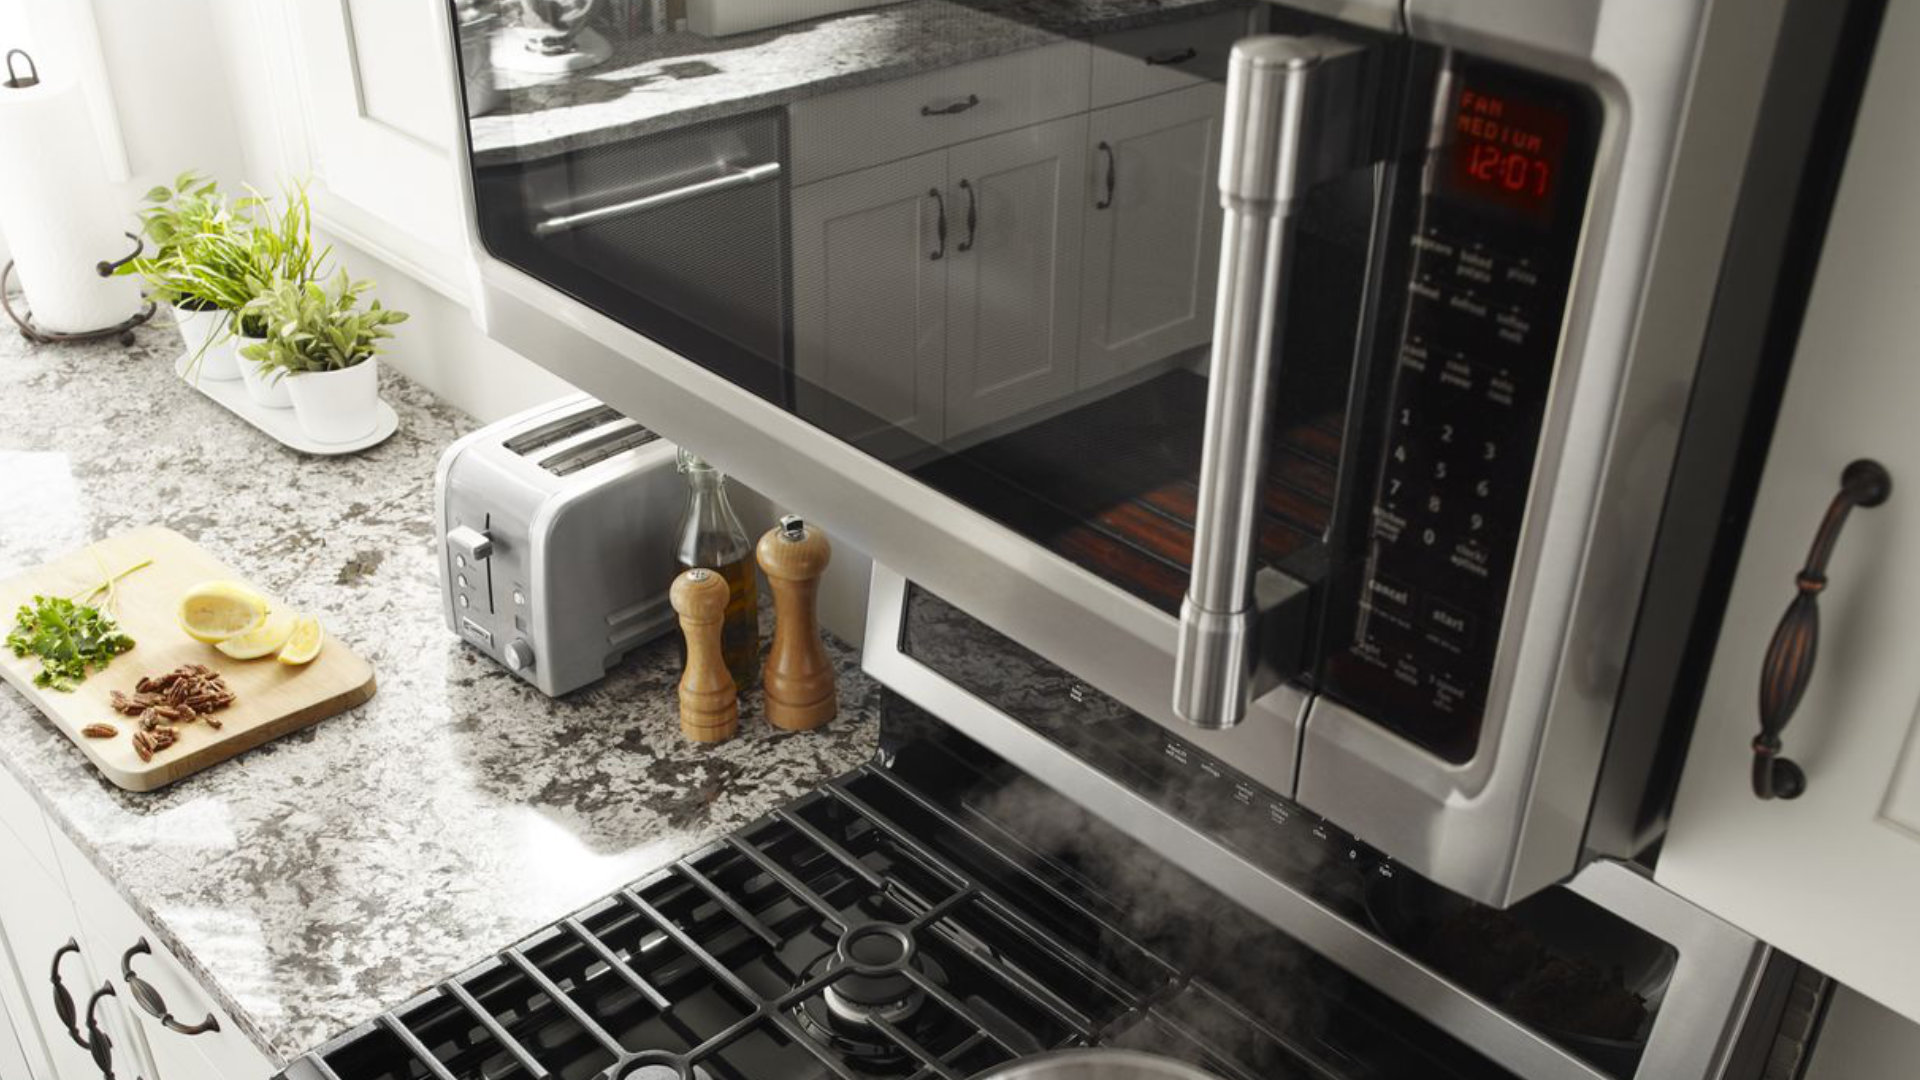 How To Fix The Error Code F0-E4 For Maytag Oven